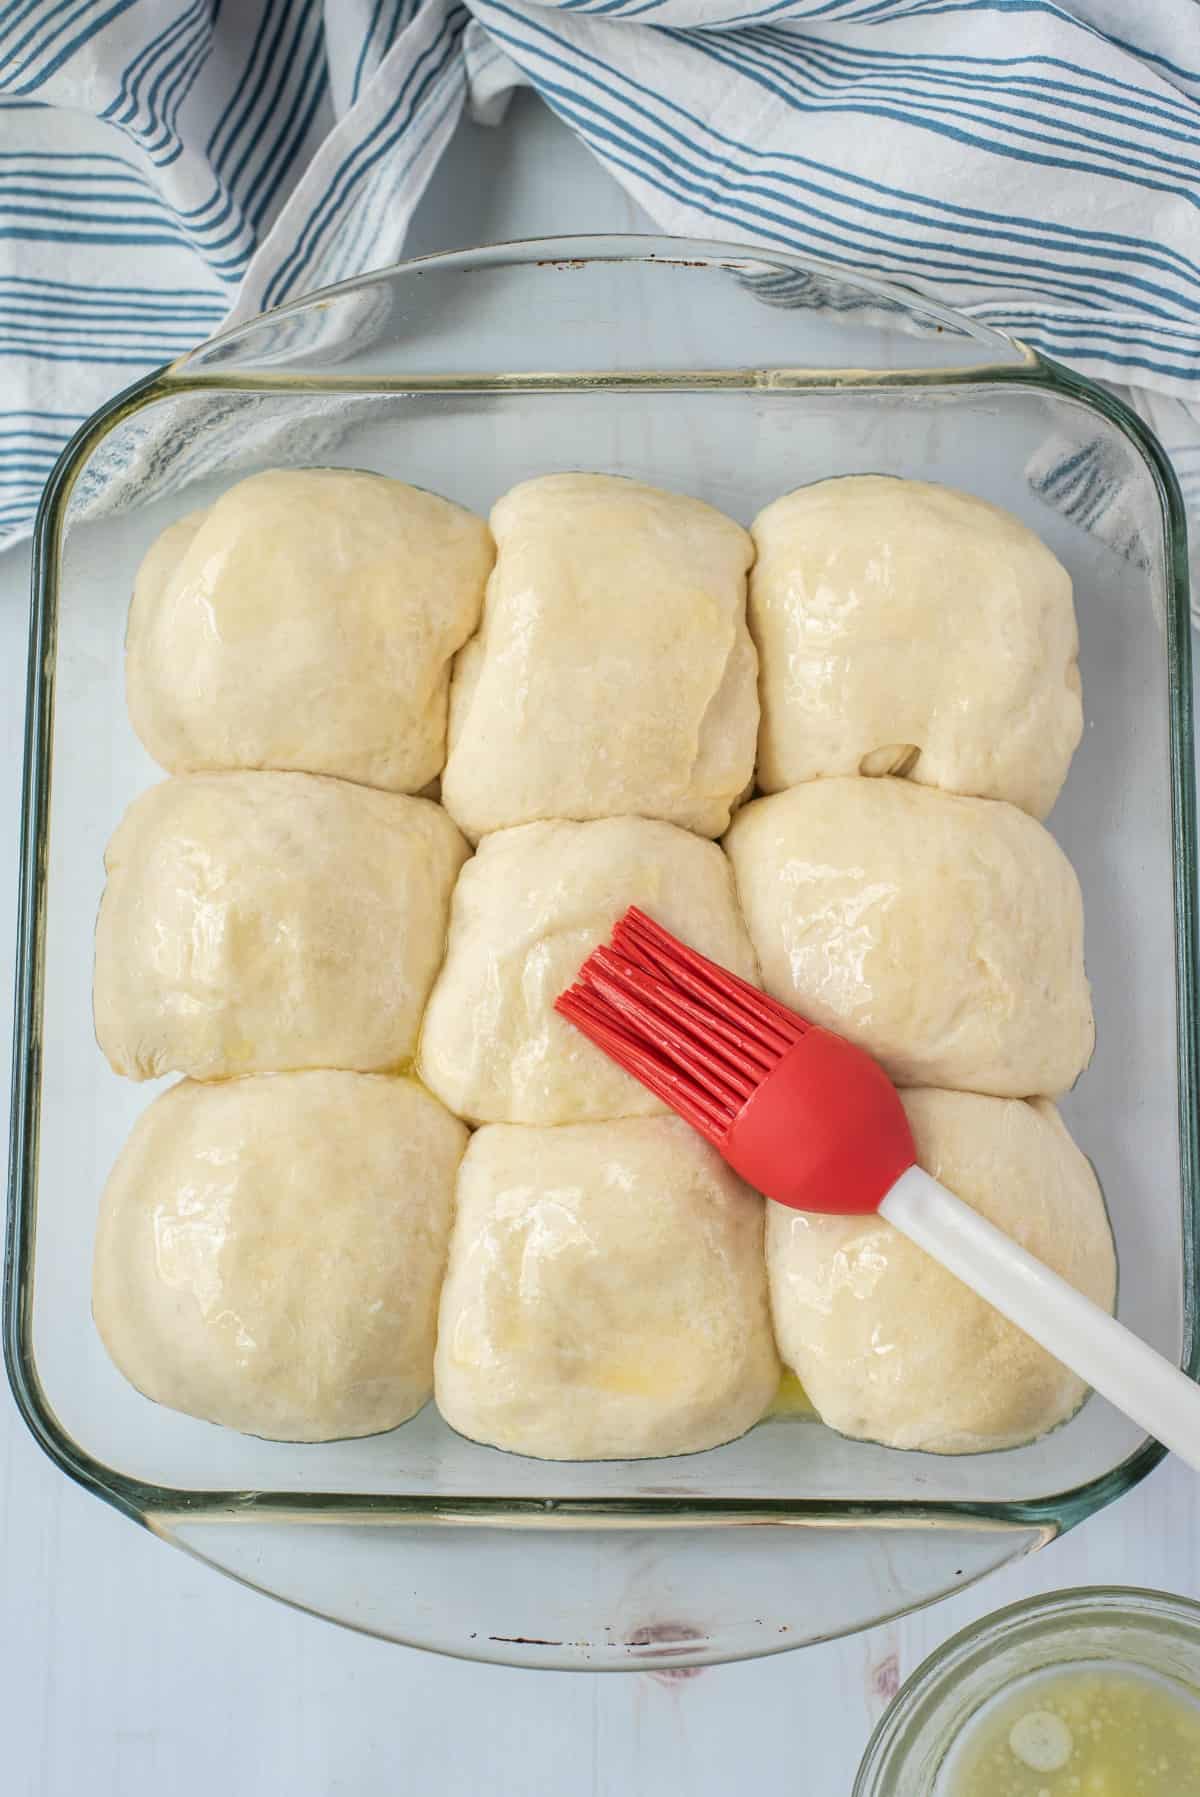 Butter brushed over dinner rolls in a clear glass baking dish.